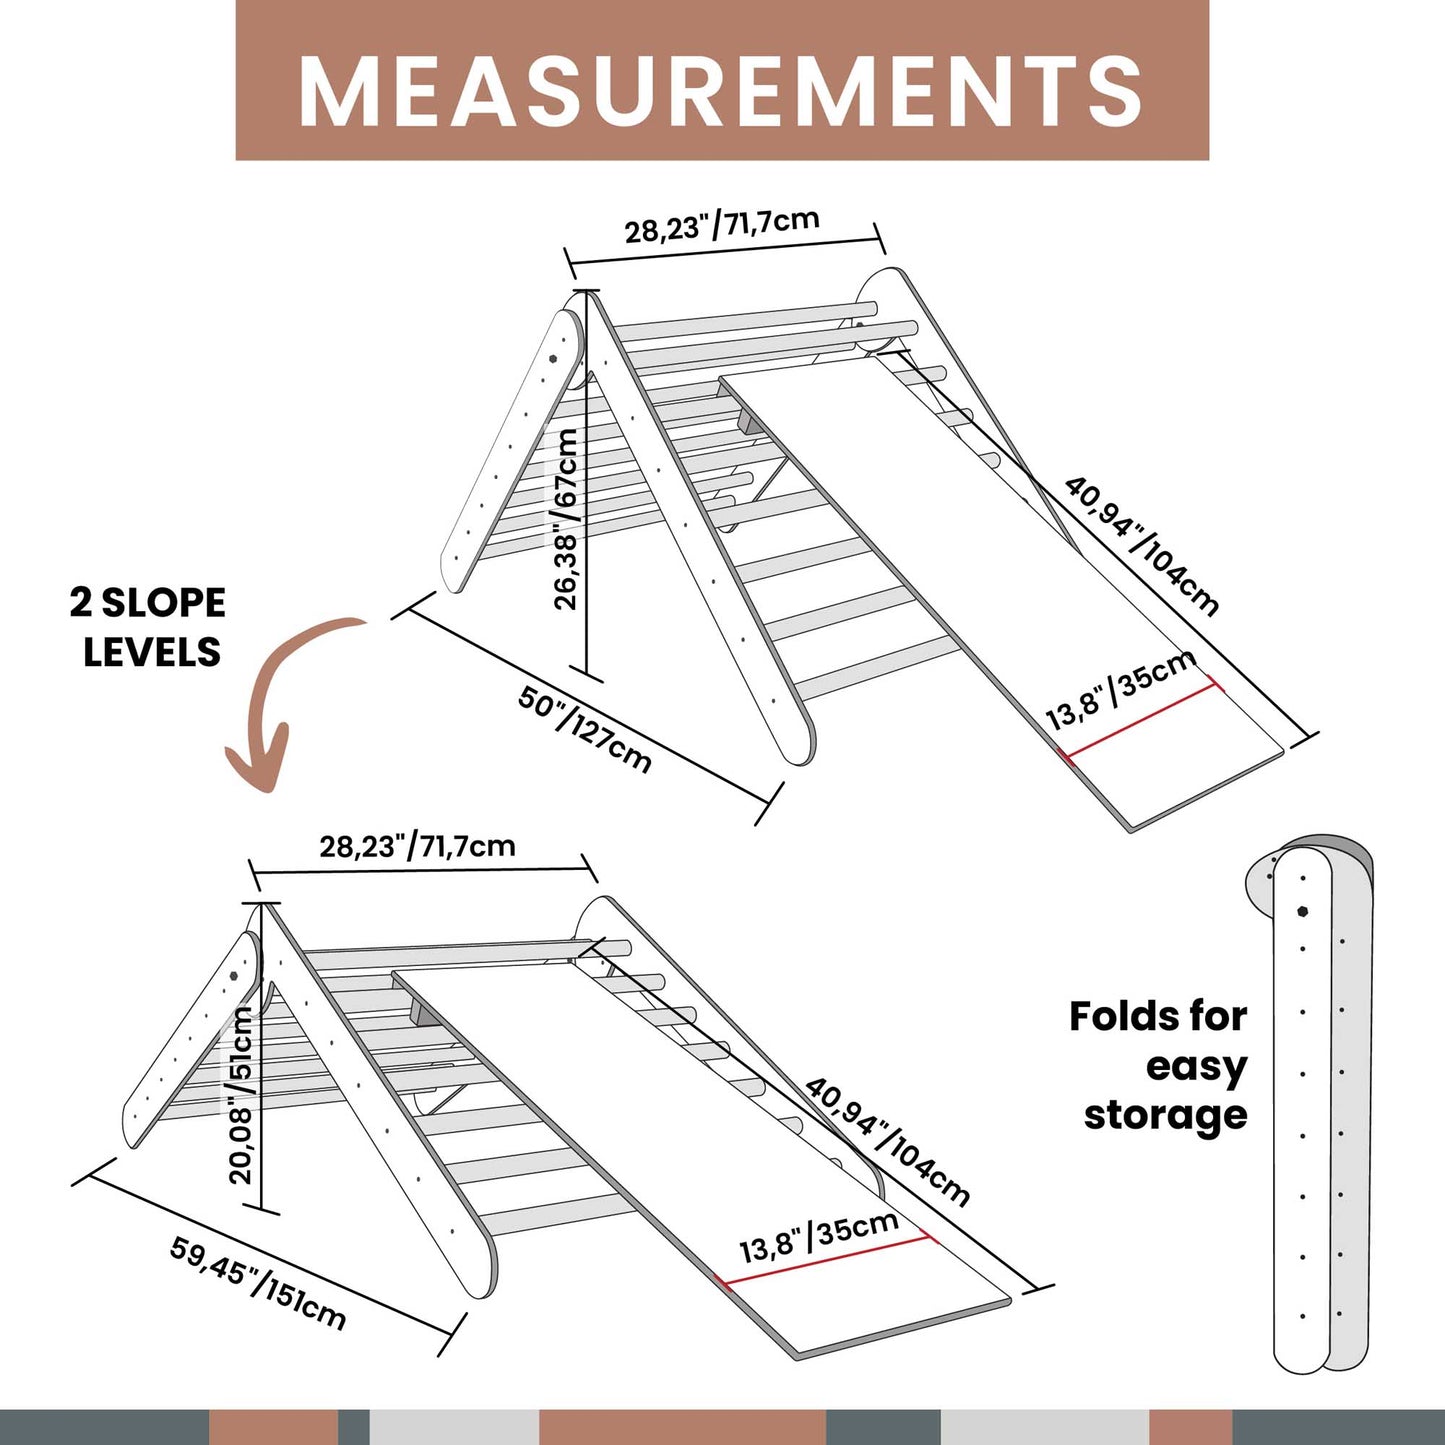 A diagram showing the measurements of a Transformable climbing triangle + Transformable climbing gym + a ramp.